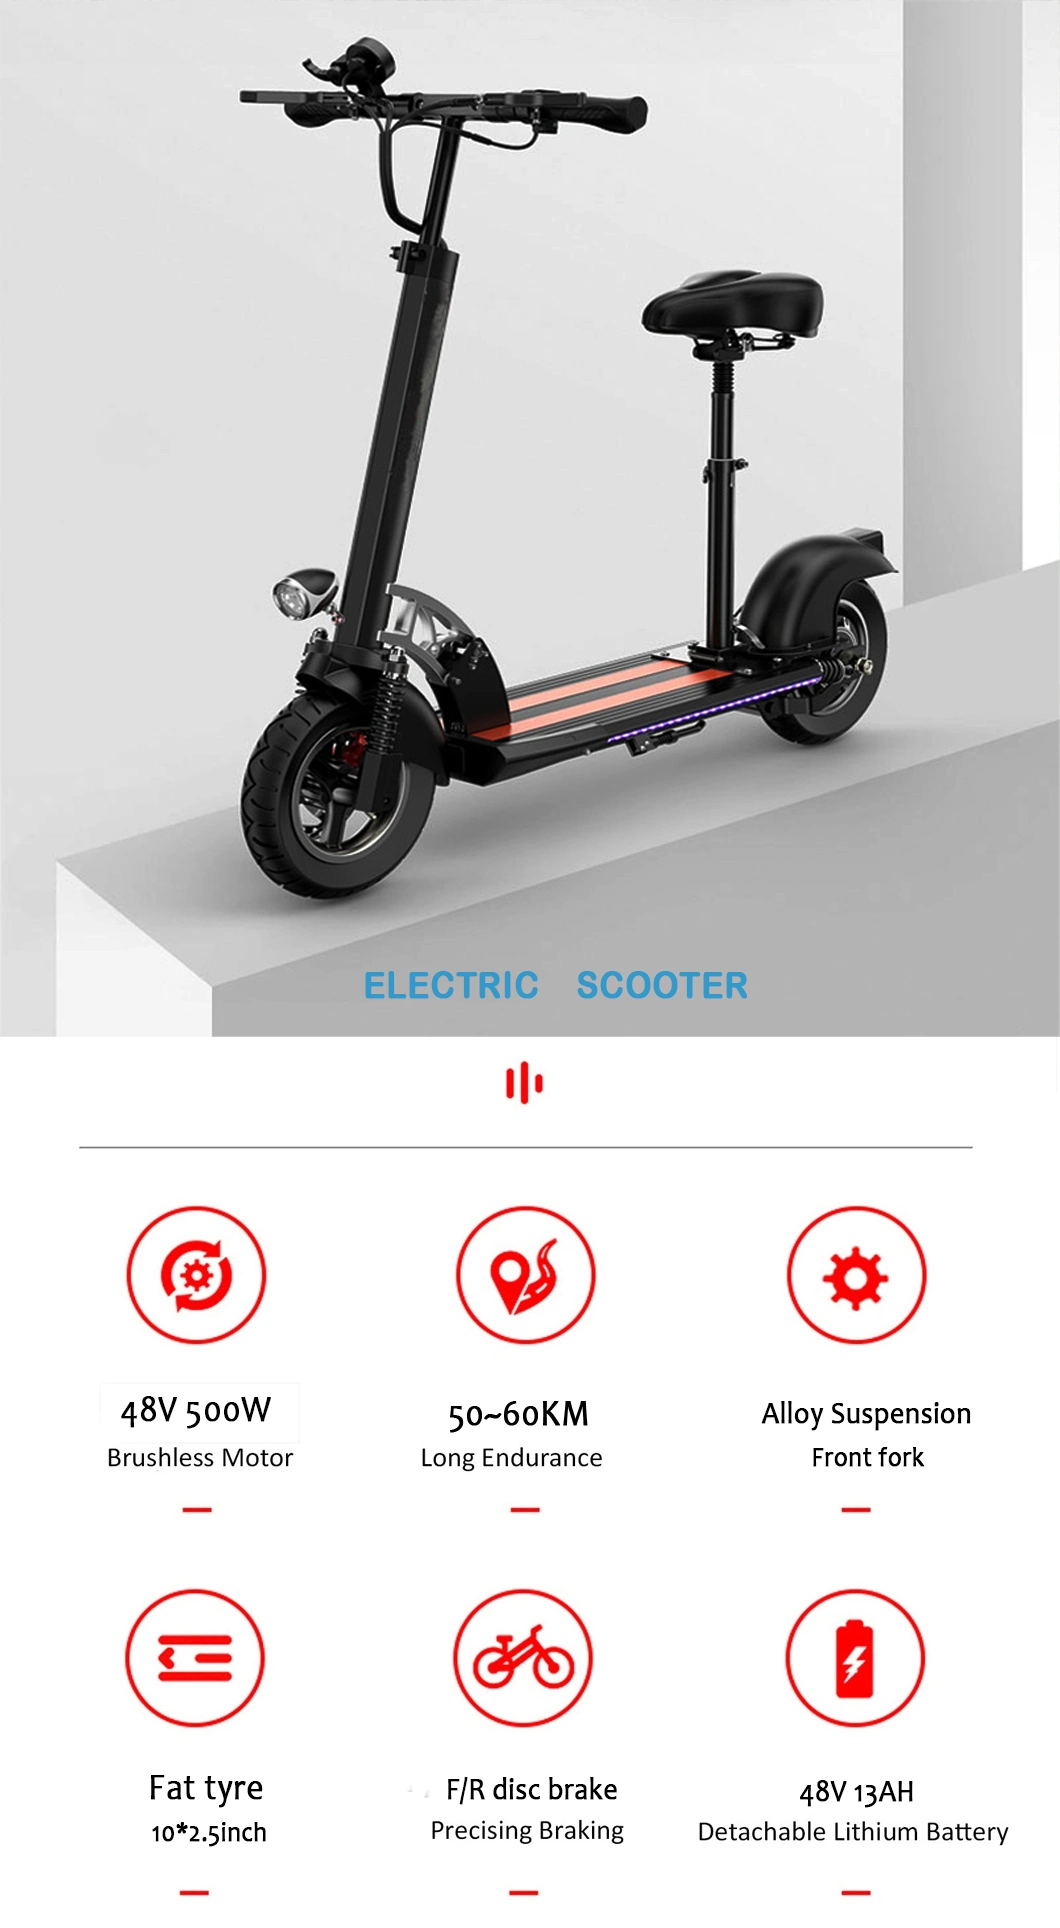 Tire 1000W 500W 450W 40kmh Adult Brushless 36V 350W 350 2000W Electric Small Size Electri Scooters